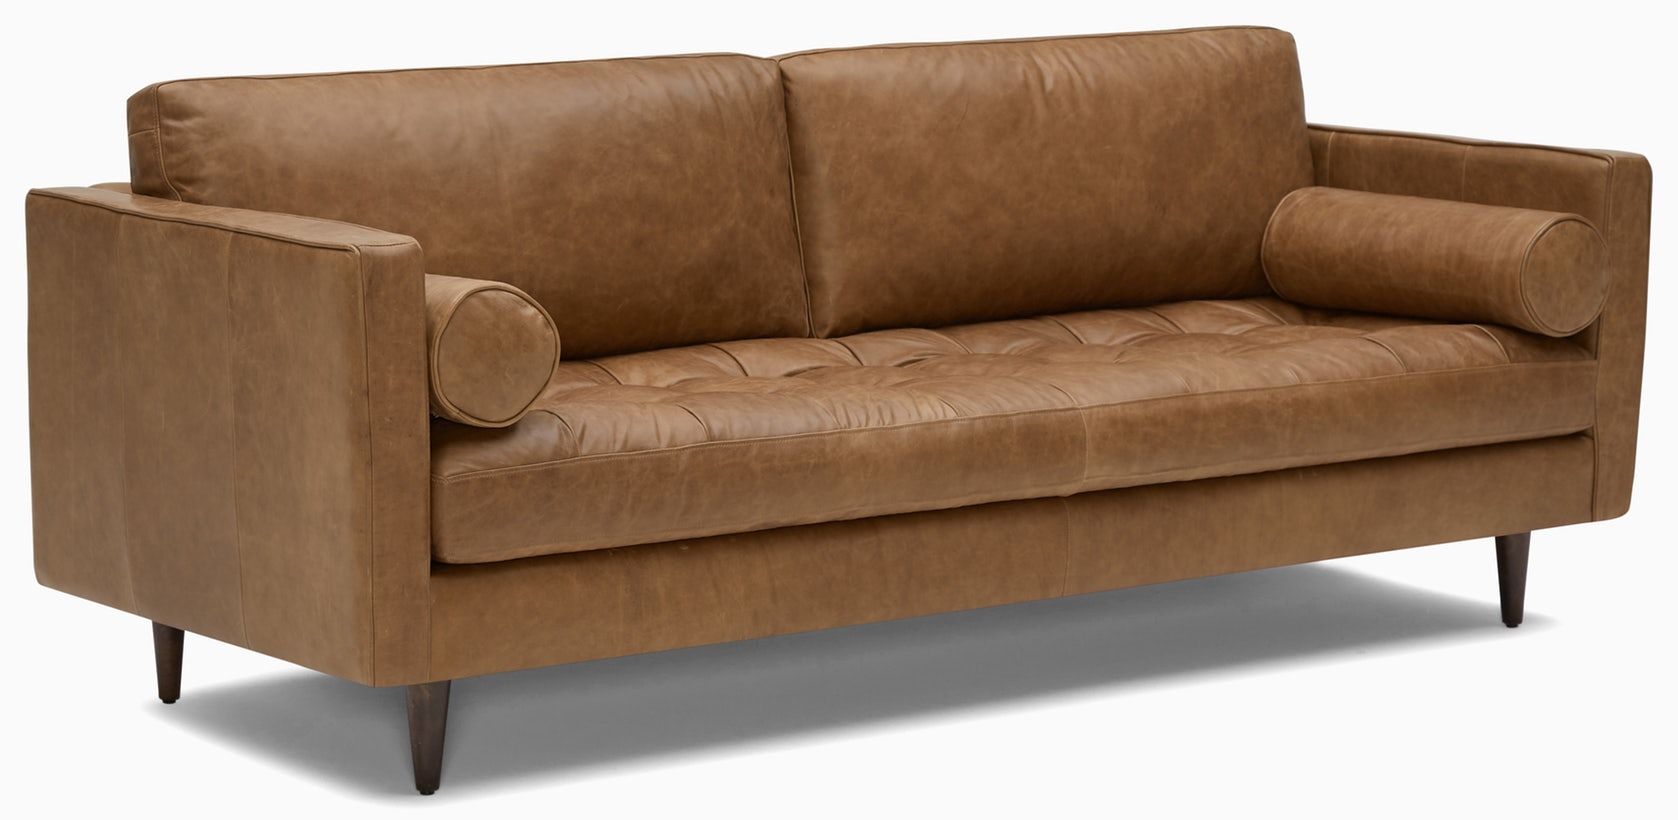 Briar Leather Sofa in Santiago Ale with Mocha wood stain - Image 1